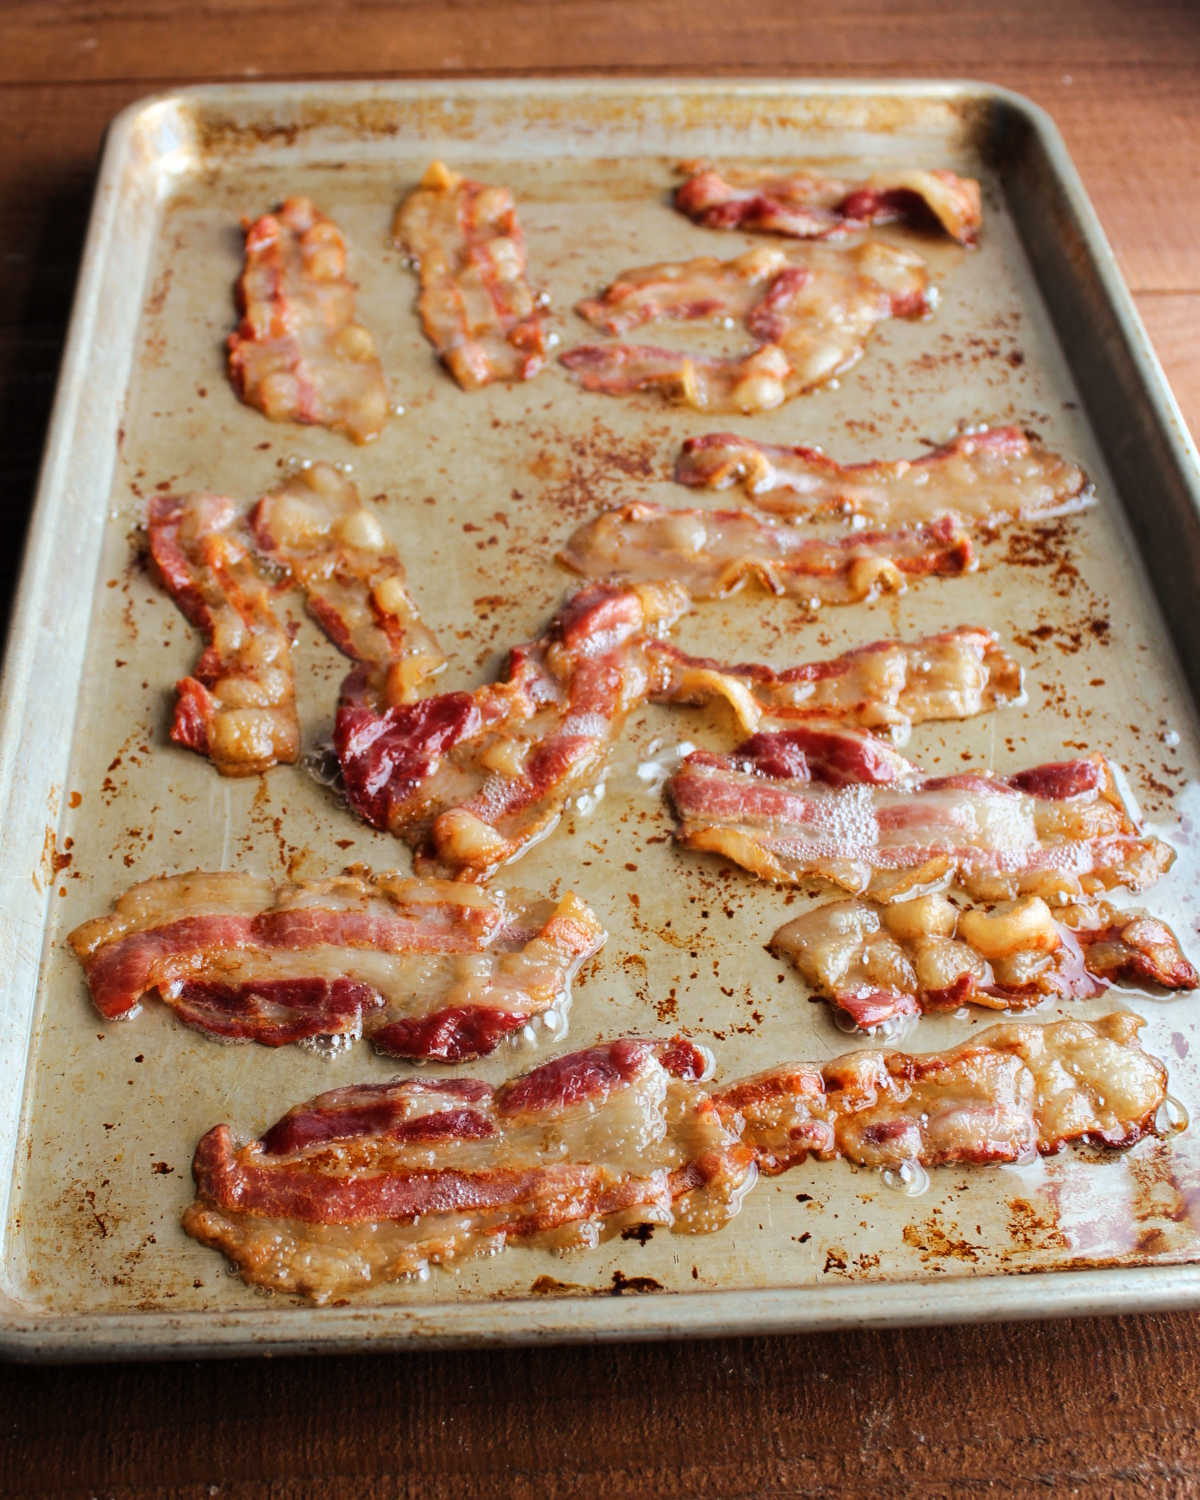 Sheet pan filled with freshly baked bacon slices and the accompanying bacon grease, ready to be drained and used in the middle of the bacon explosion.